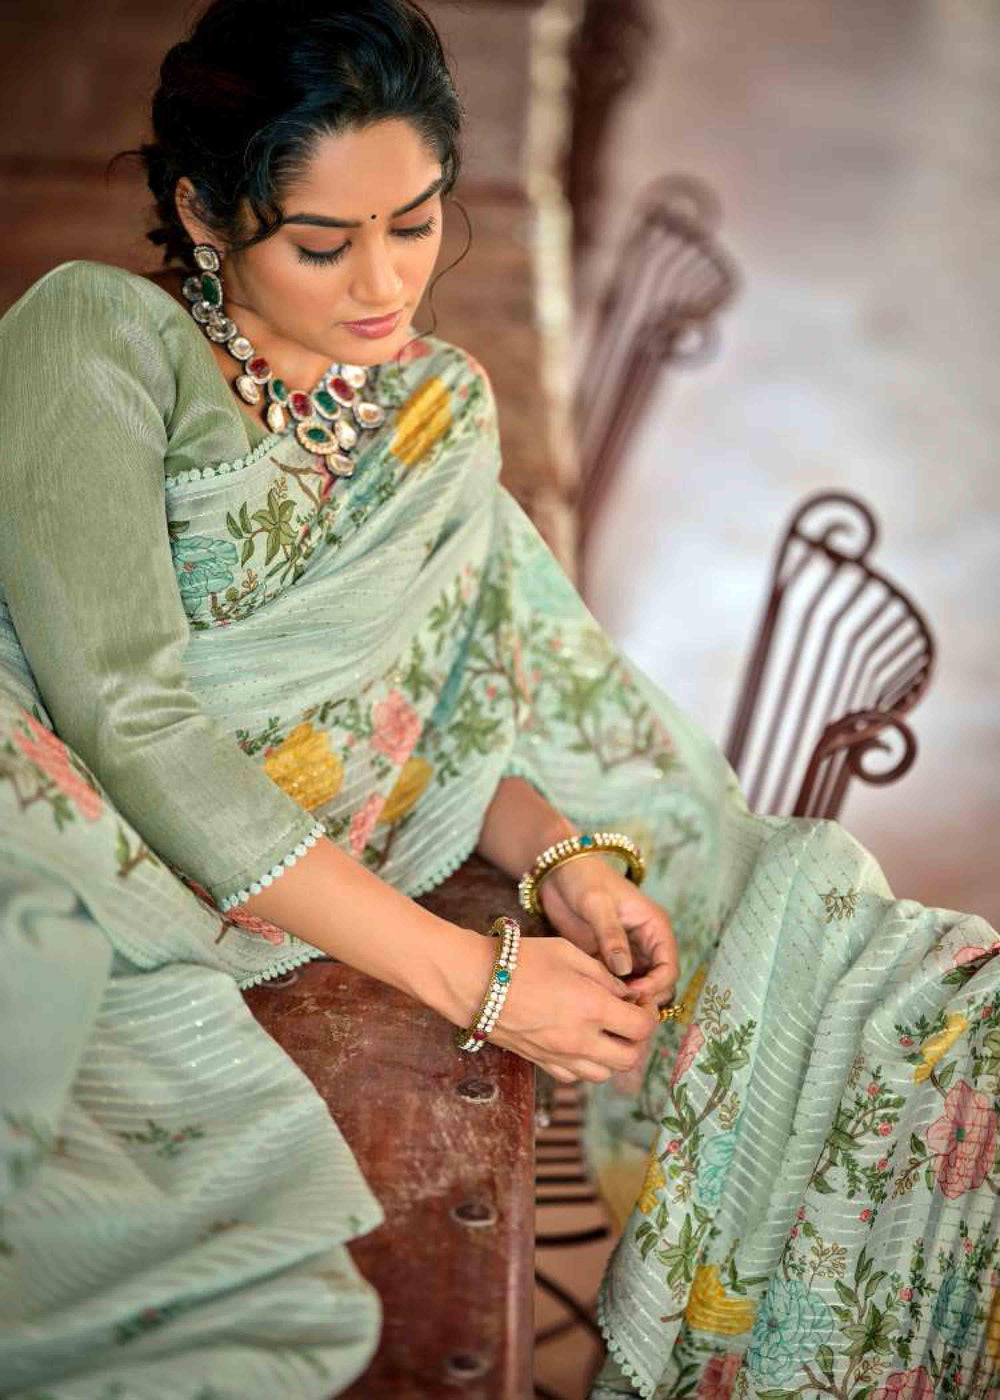 Woman in floral jal crochet saree sitting on bench.